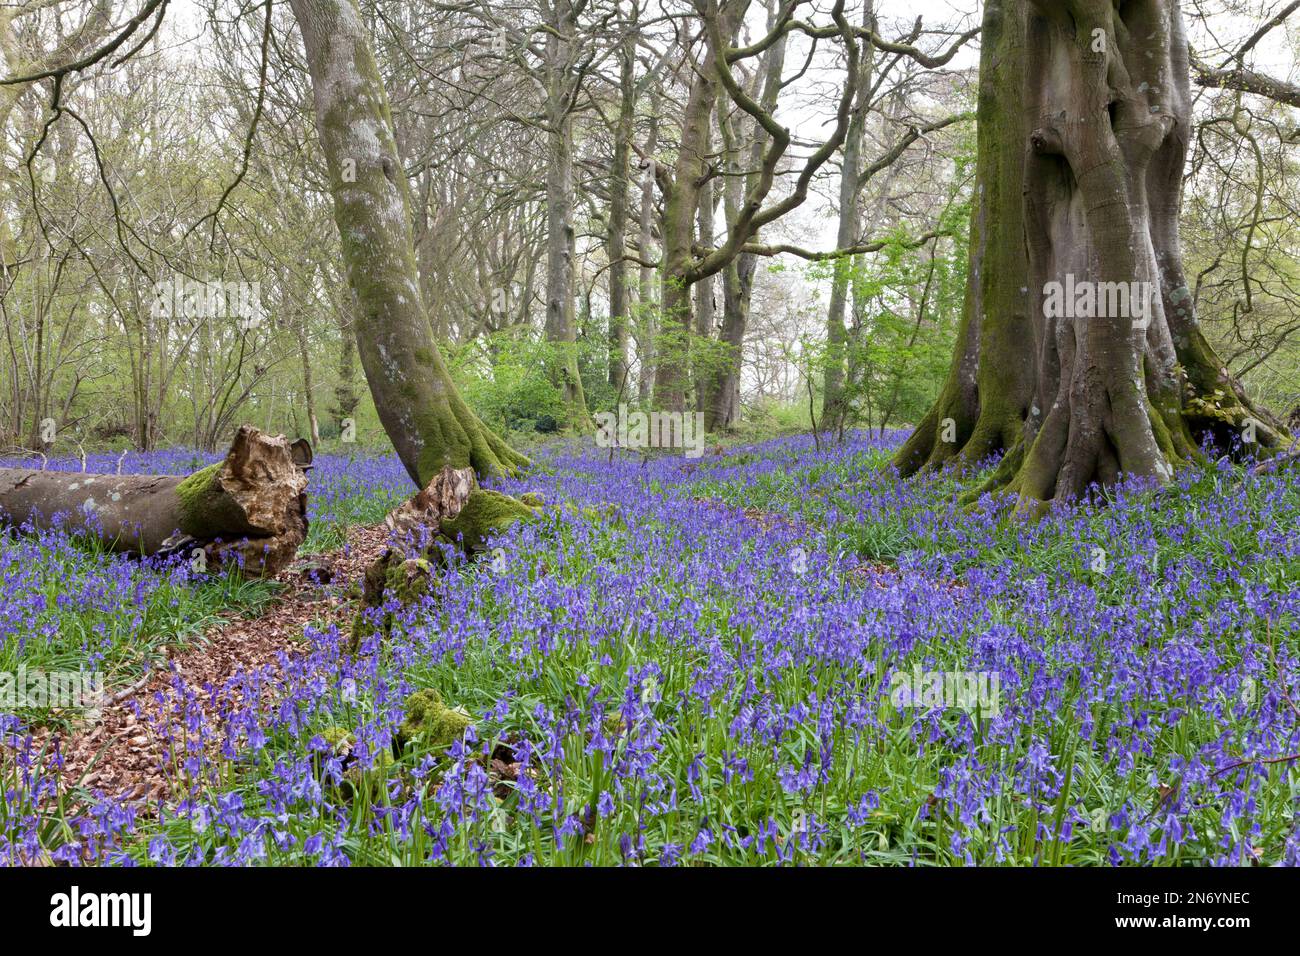 Bluebells a Grovely Wood, vicino a Wilton nel Wiltshire. Foto Stock